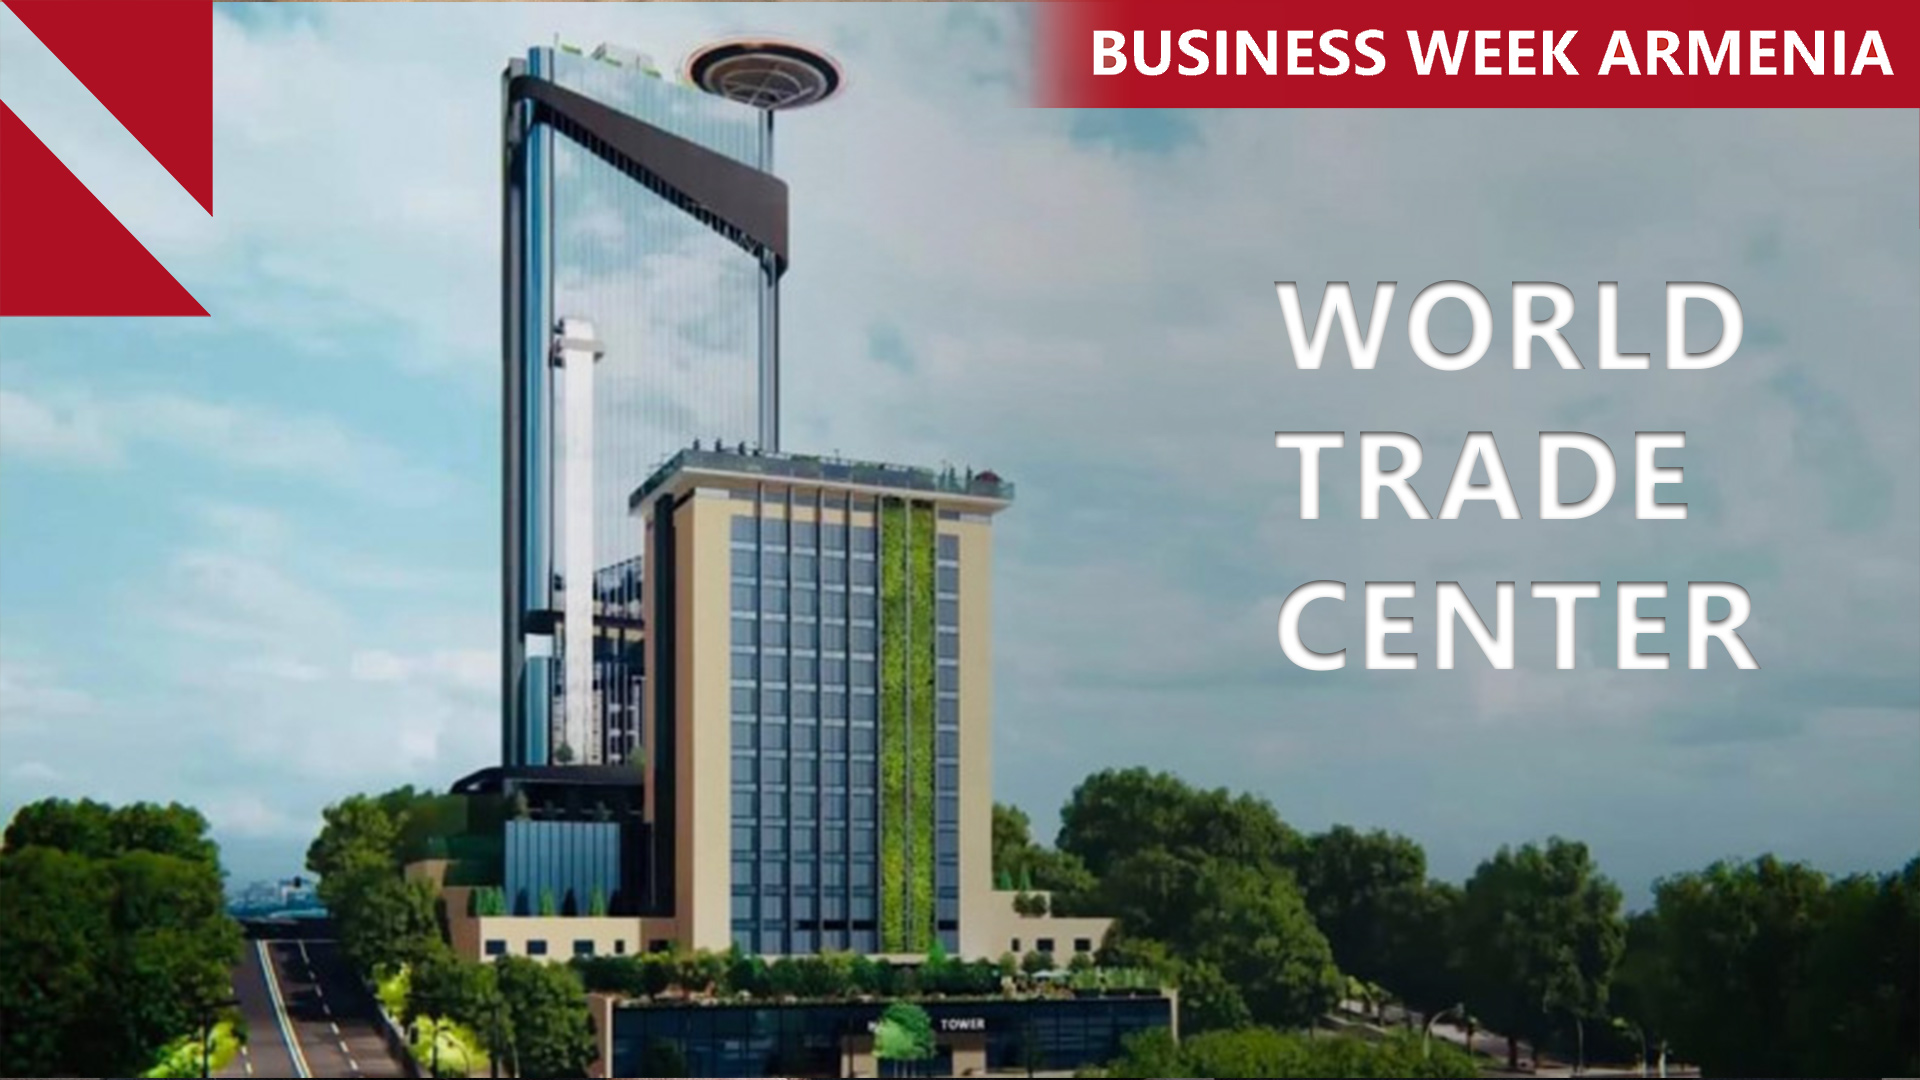 Armenia taps local developer for World Trade Center Yerevan: THIS WEEK IN BUSINESS